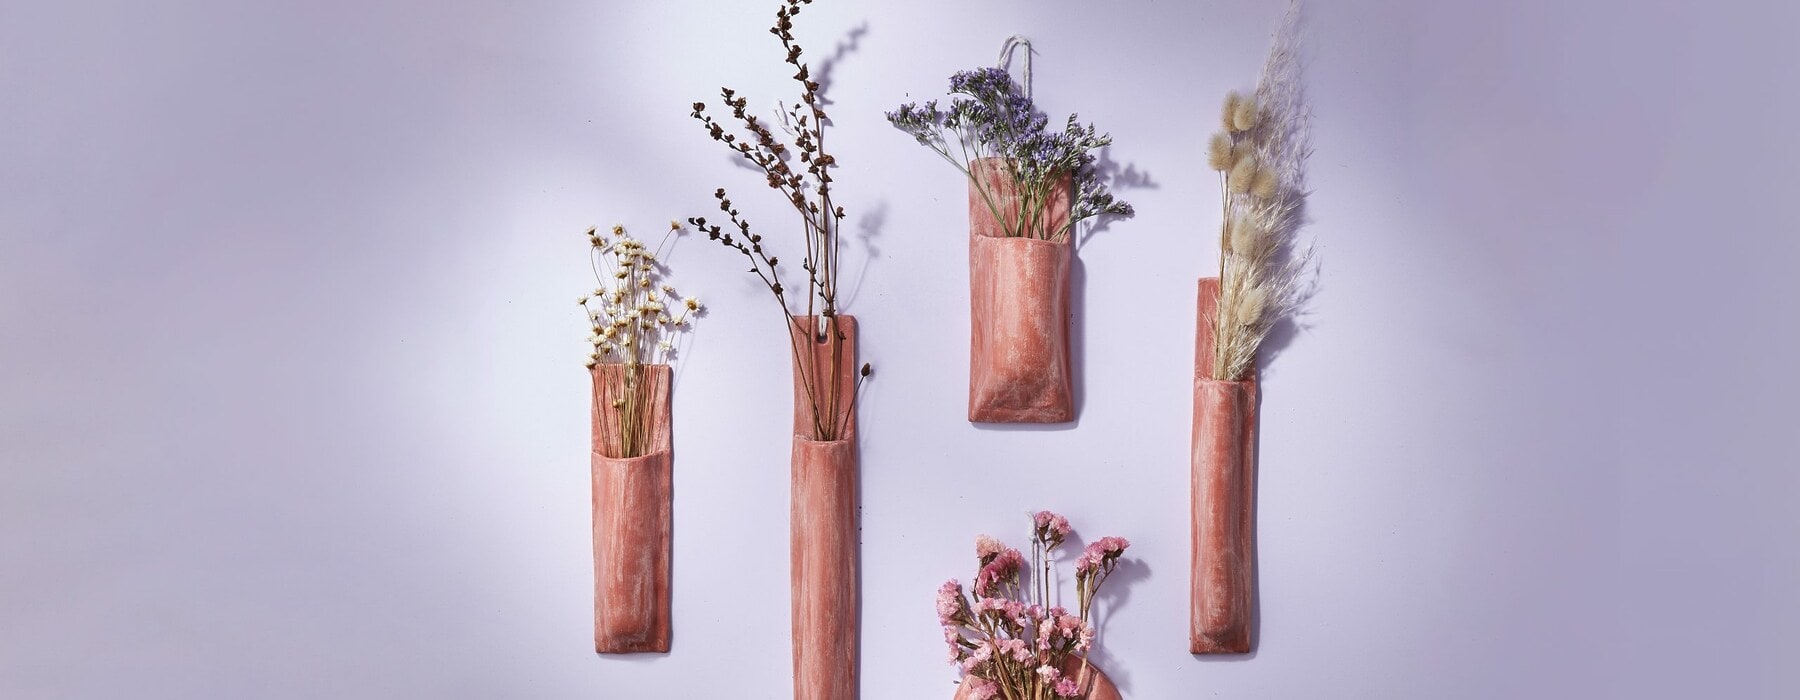 Terracotta wall vases hanging on purple wall